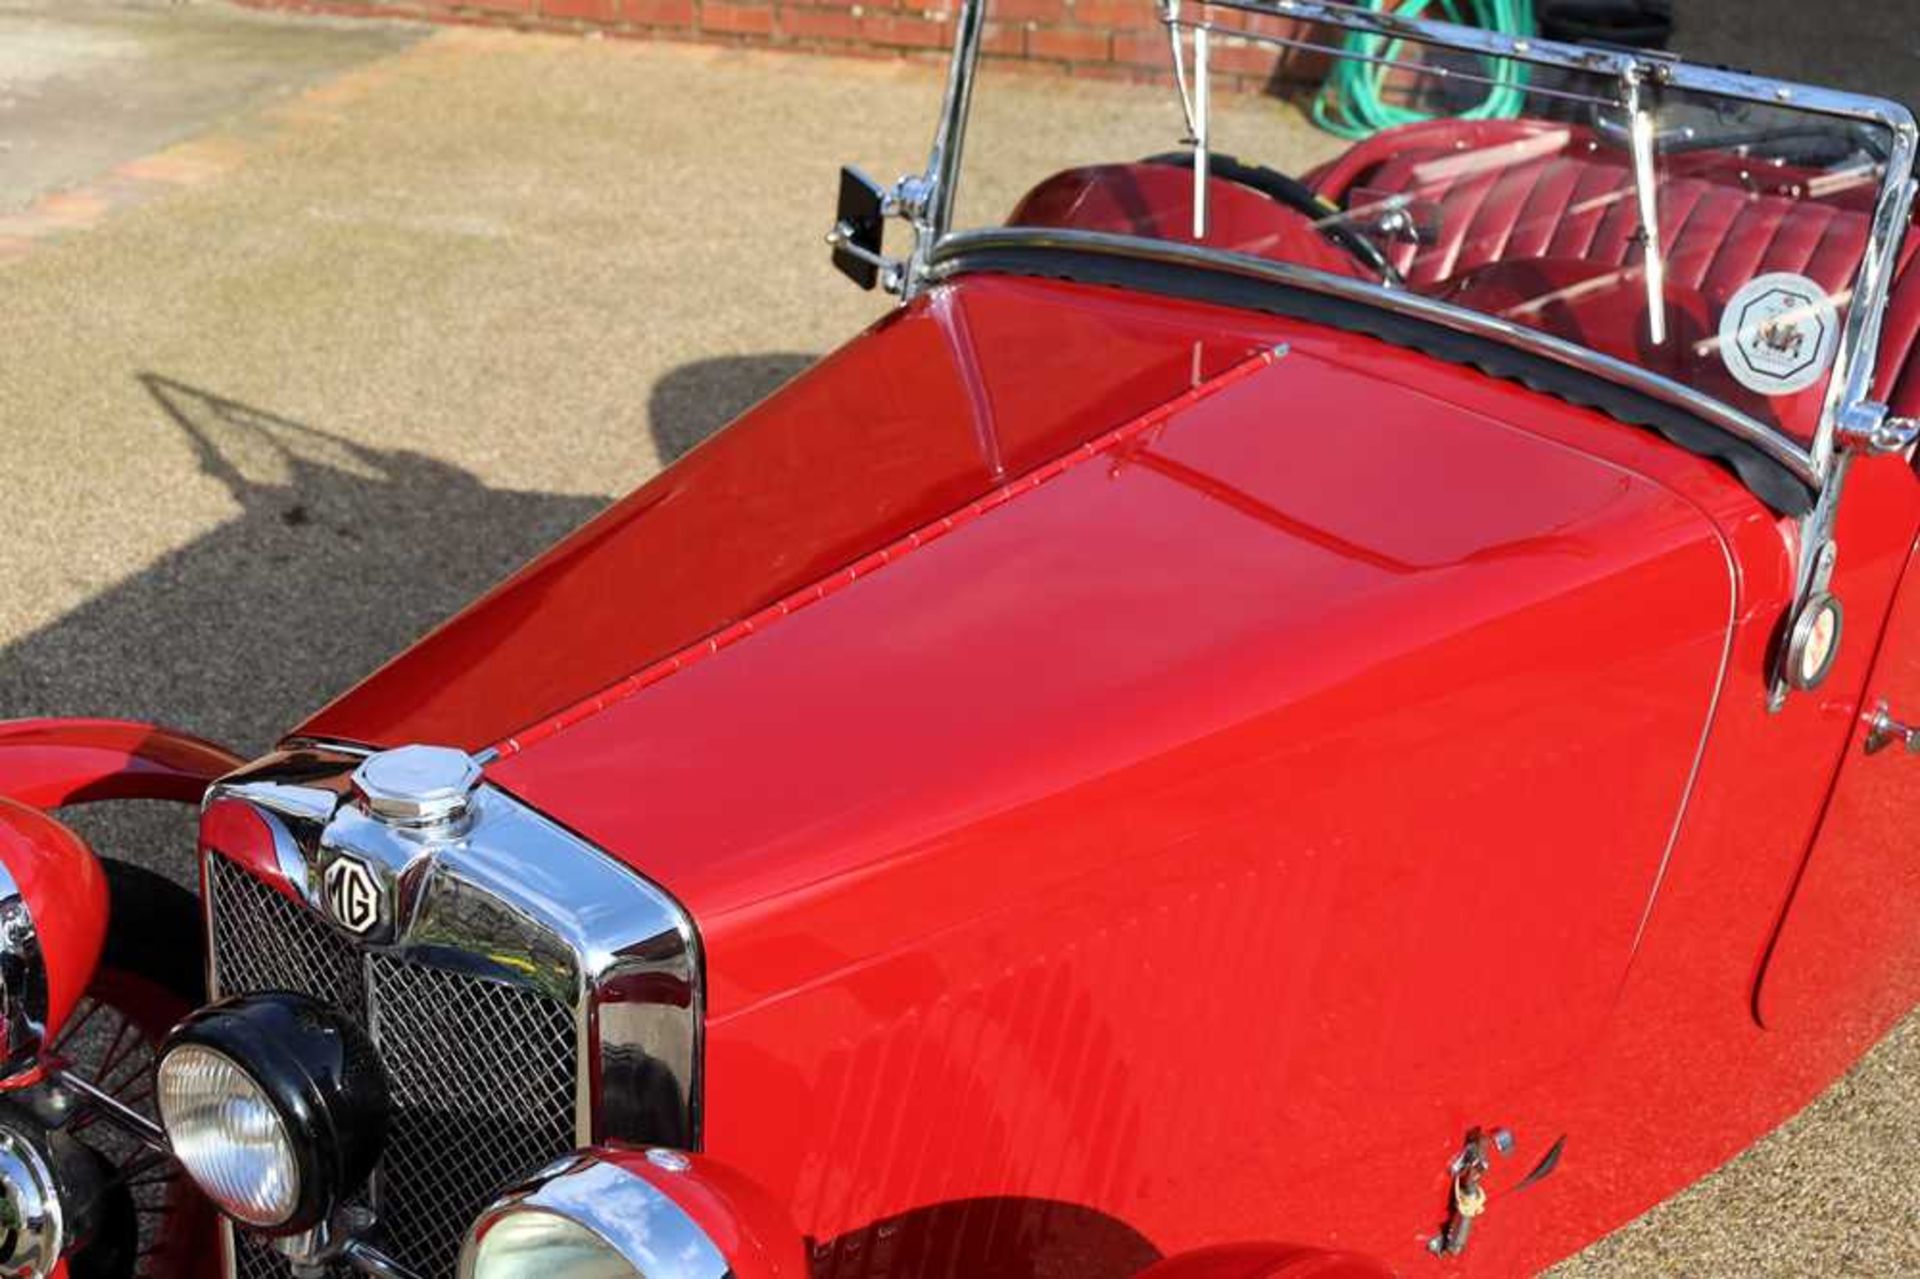 1932 MG J2 Midget Excellently restored and with period competition history - Image 23 of 76